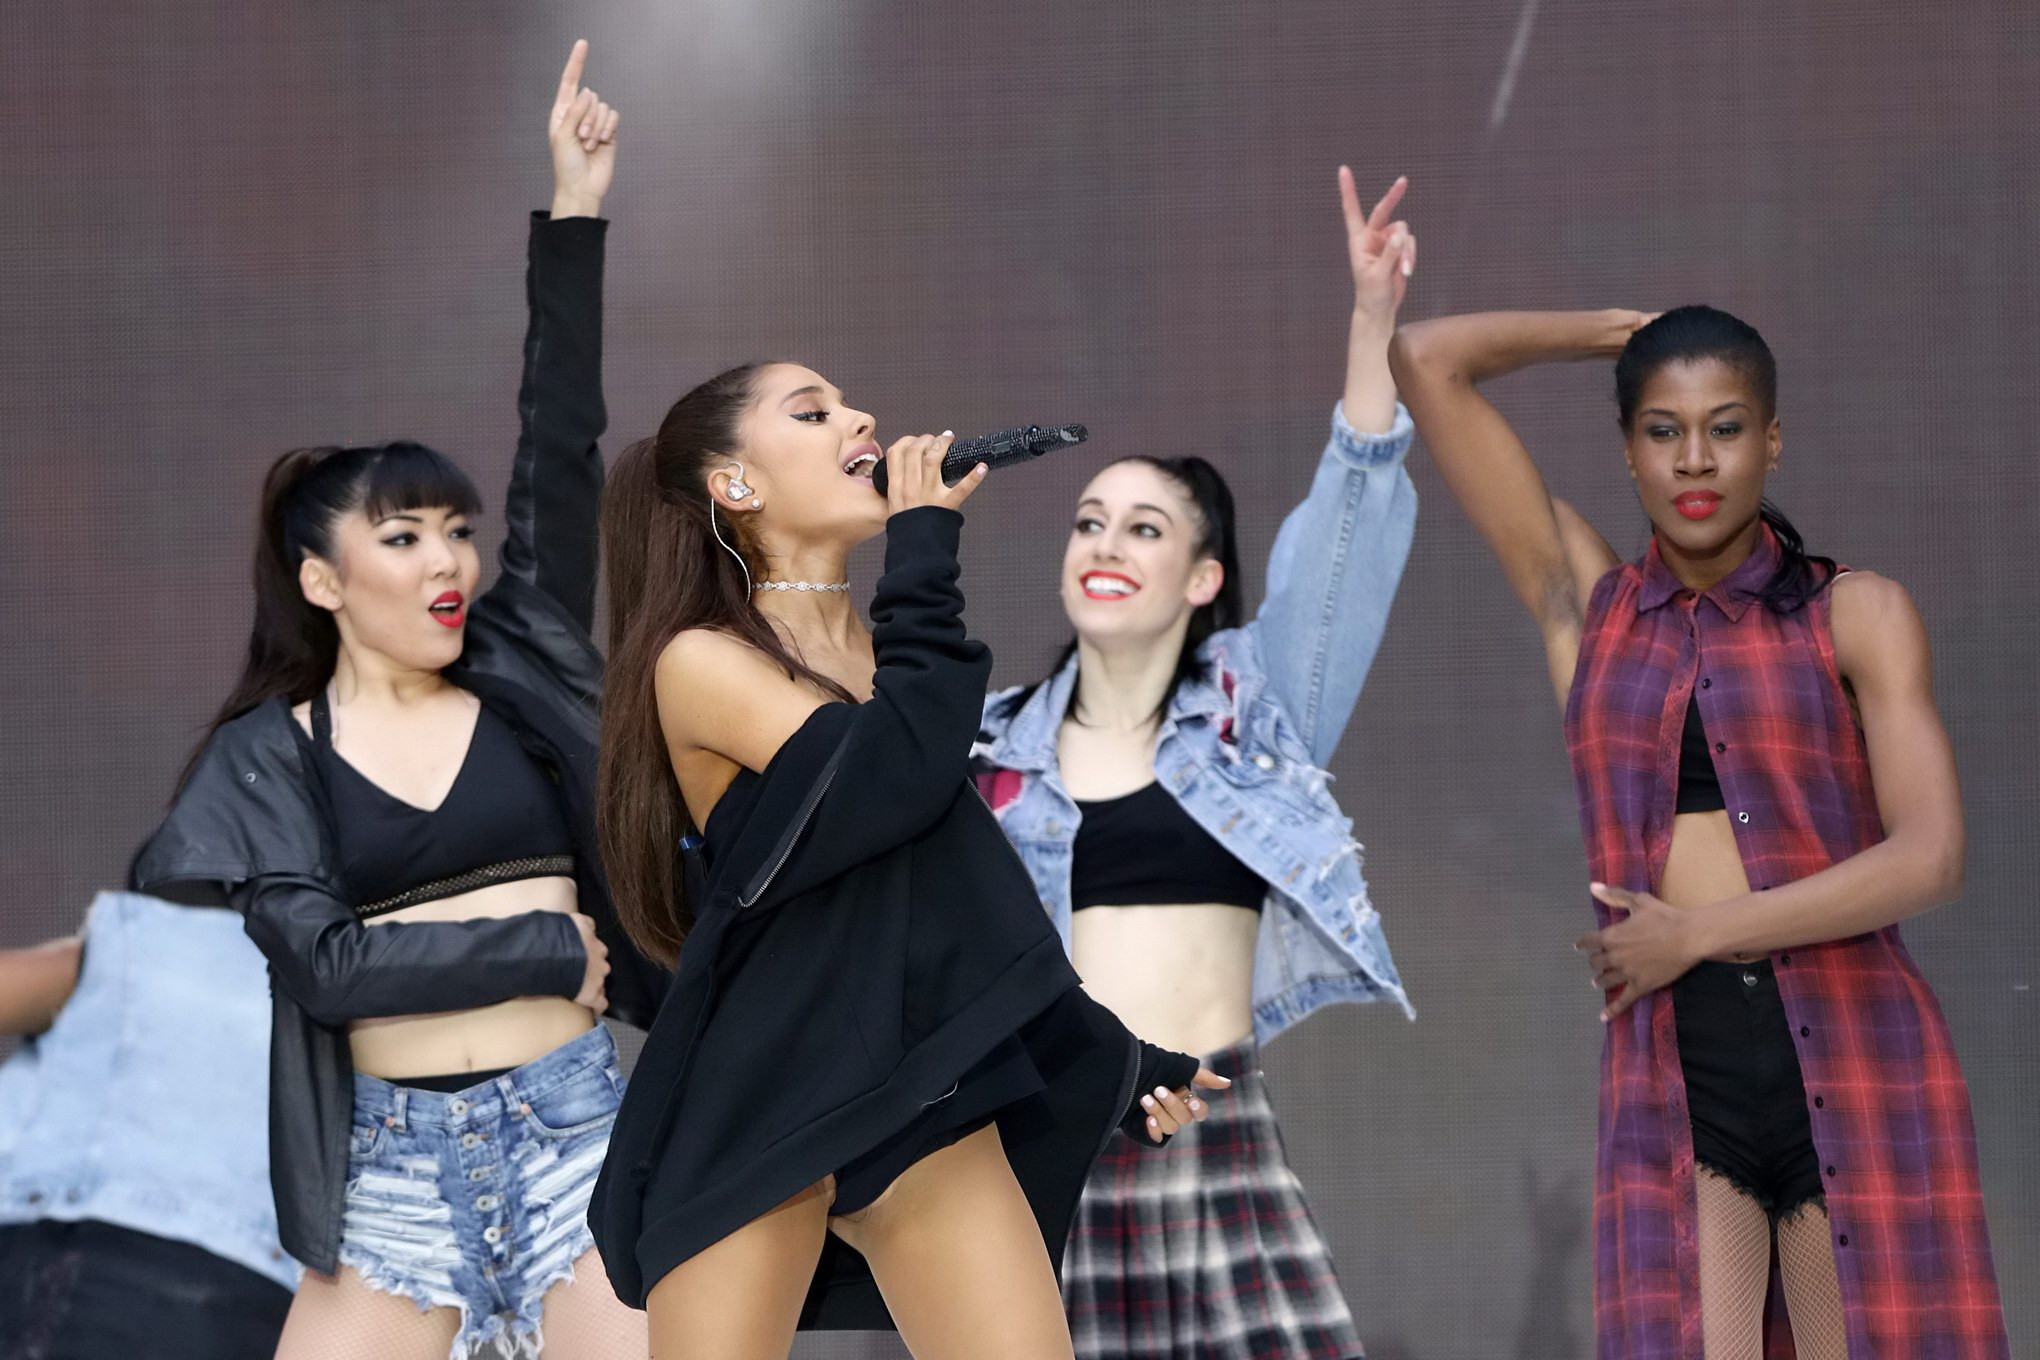 Ariana Grande shows off her shaved pussy in a tiny black outfit while performing #75161946